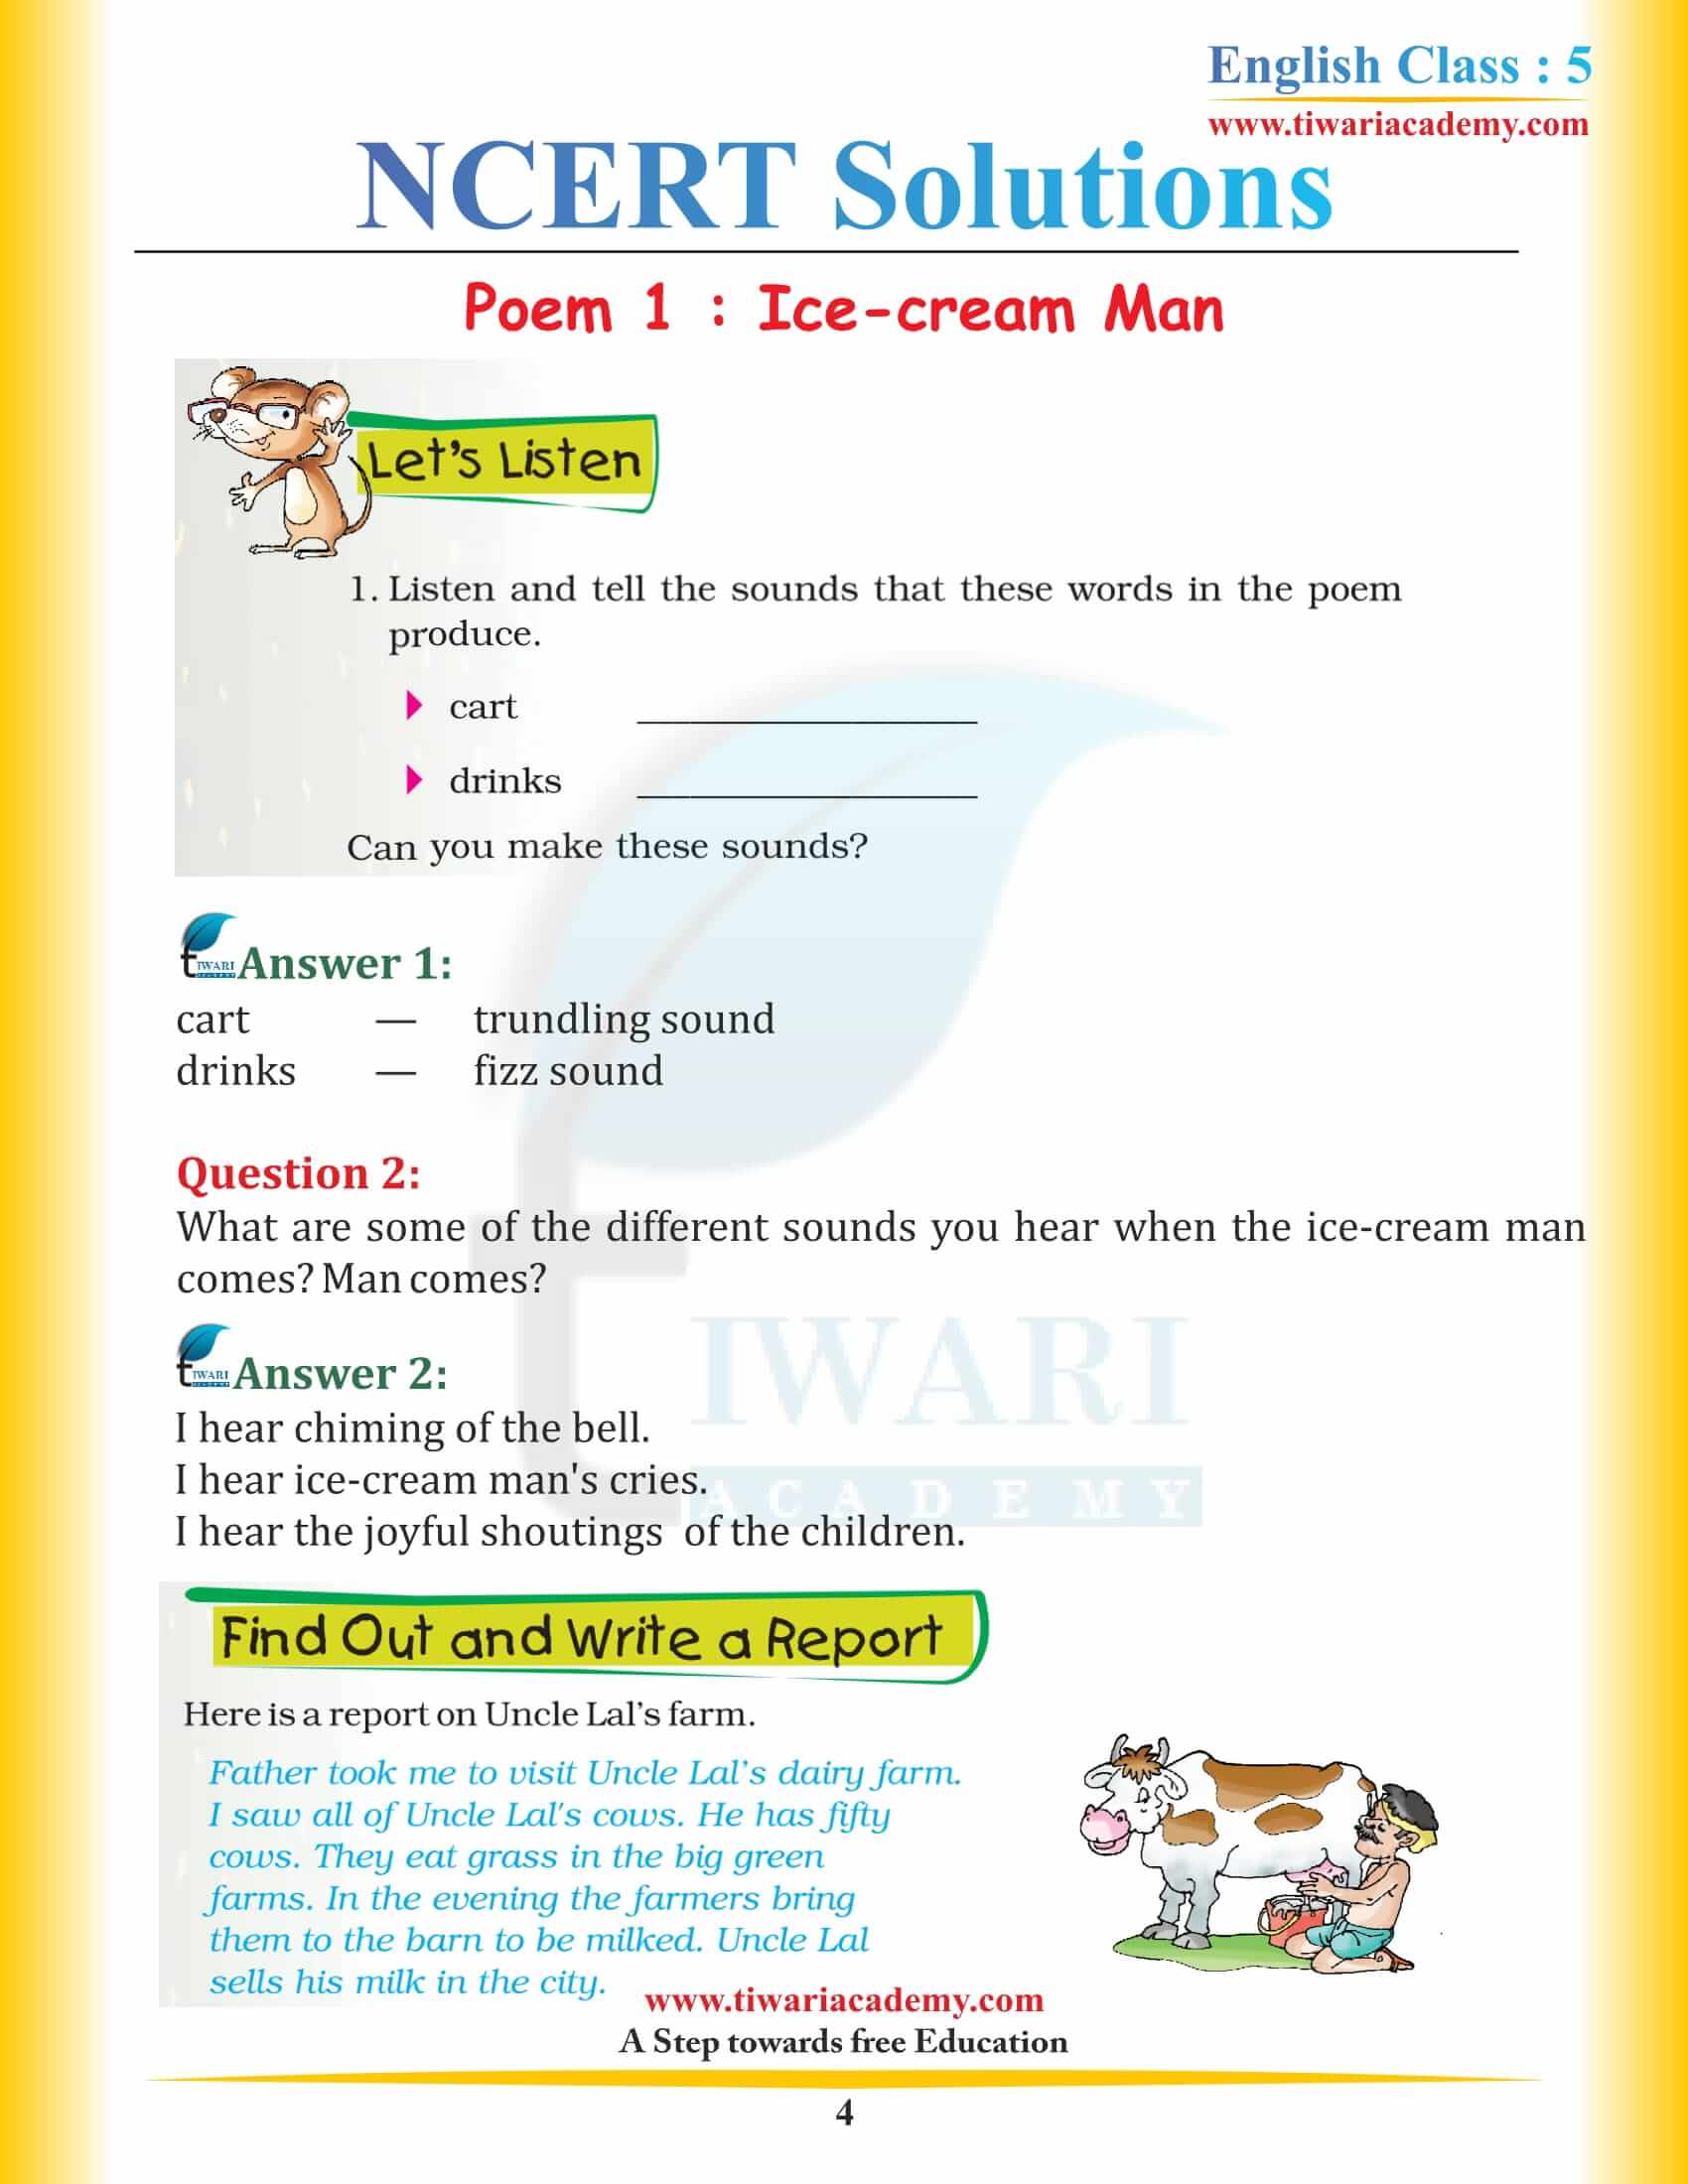 NCERT Solutions for Class 5 English Chapter 1 Ice-cream Man Question answers